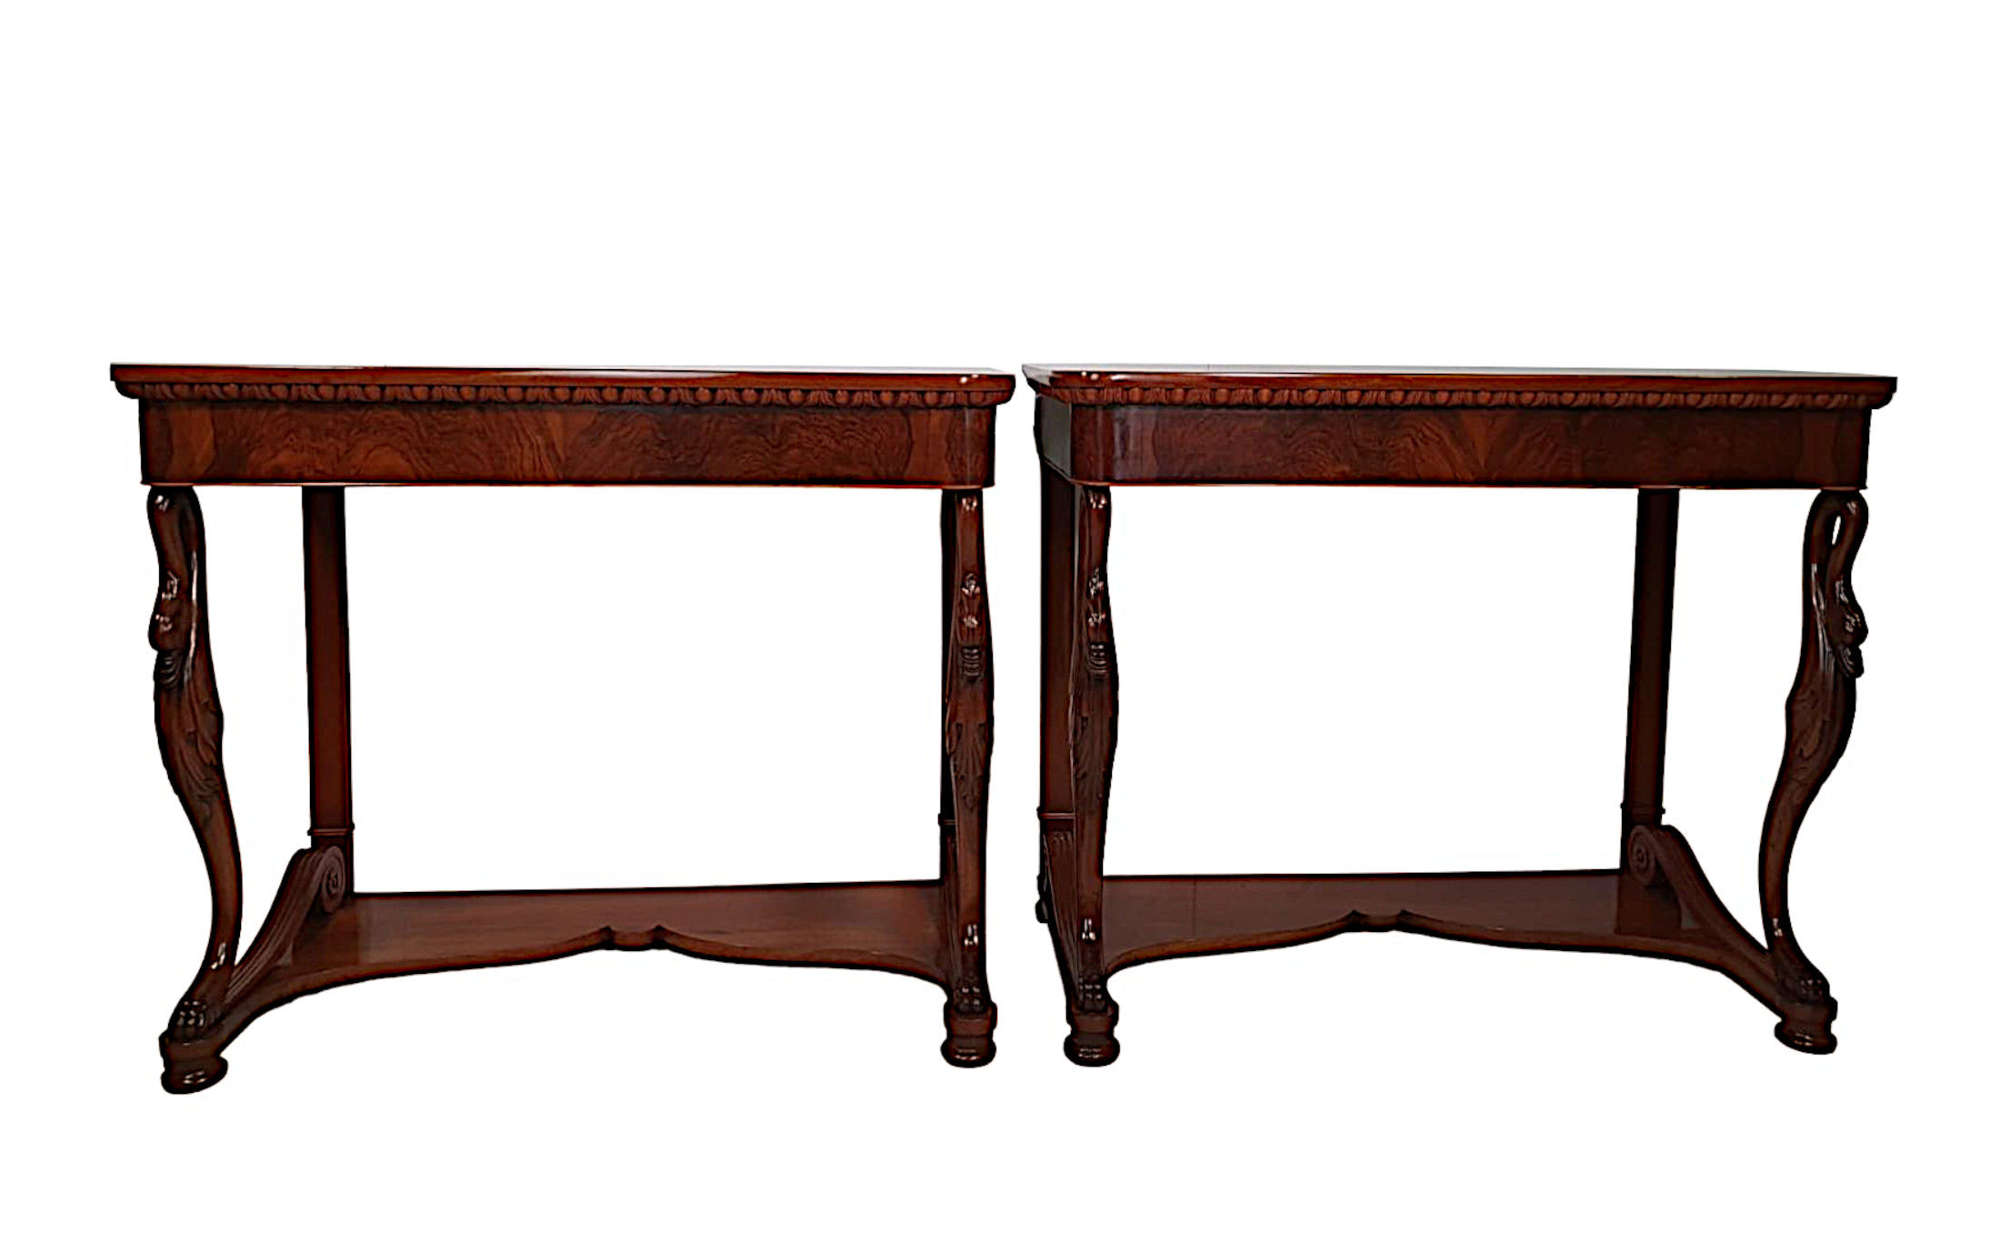 A Very Fine And Rare Pair Of 19th Century Italian Antique Console Tables